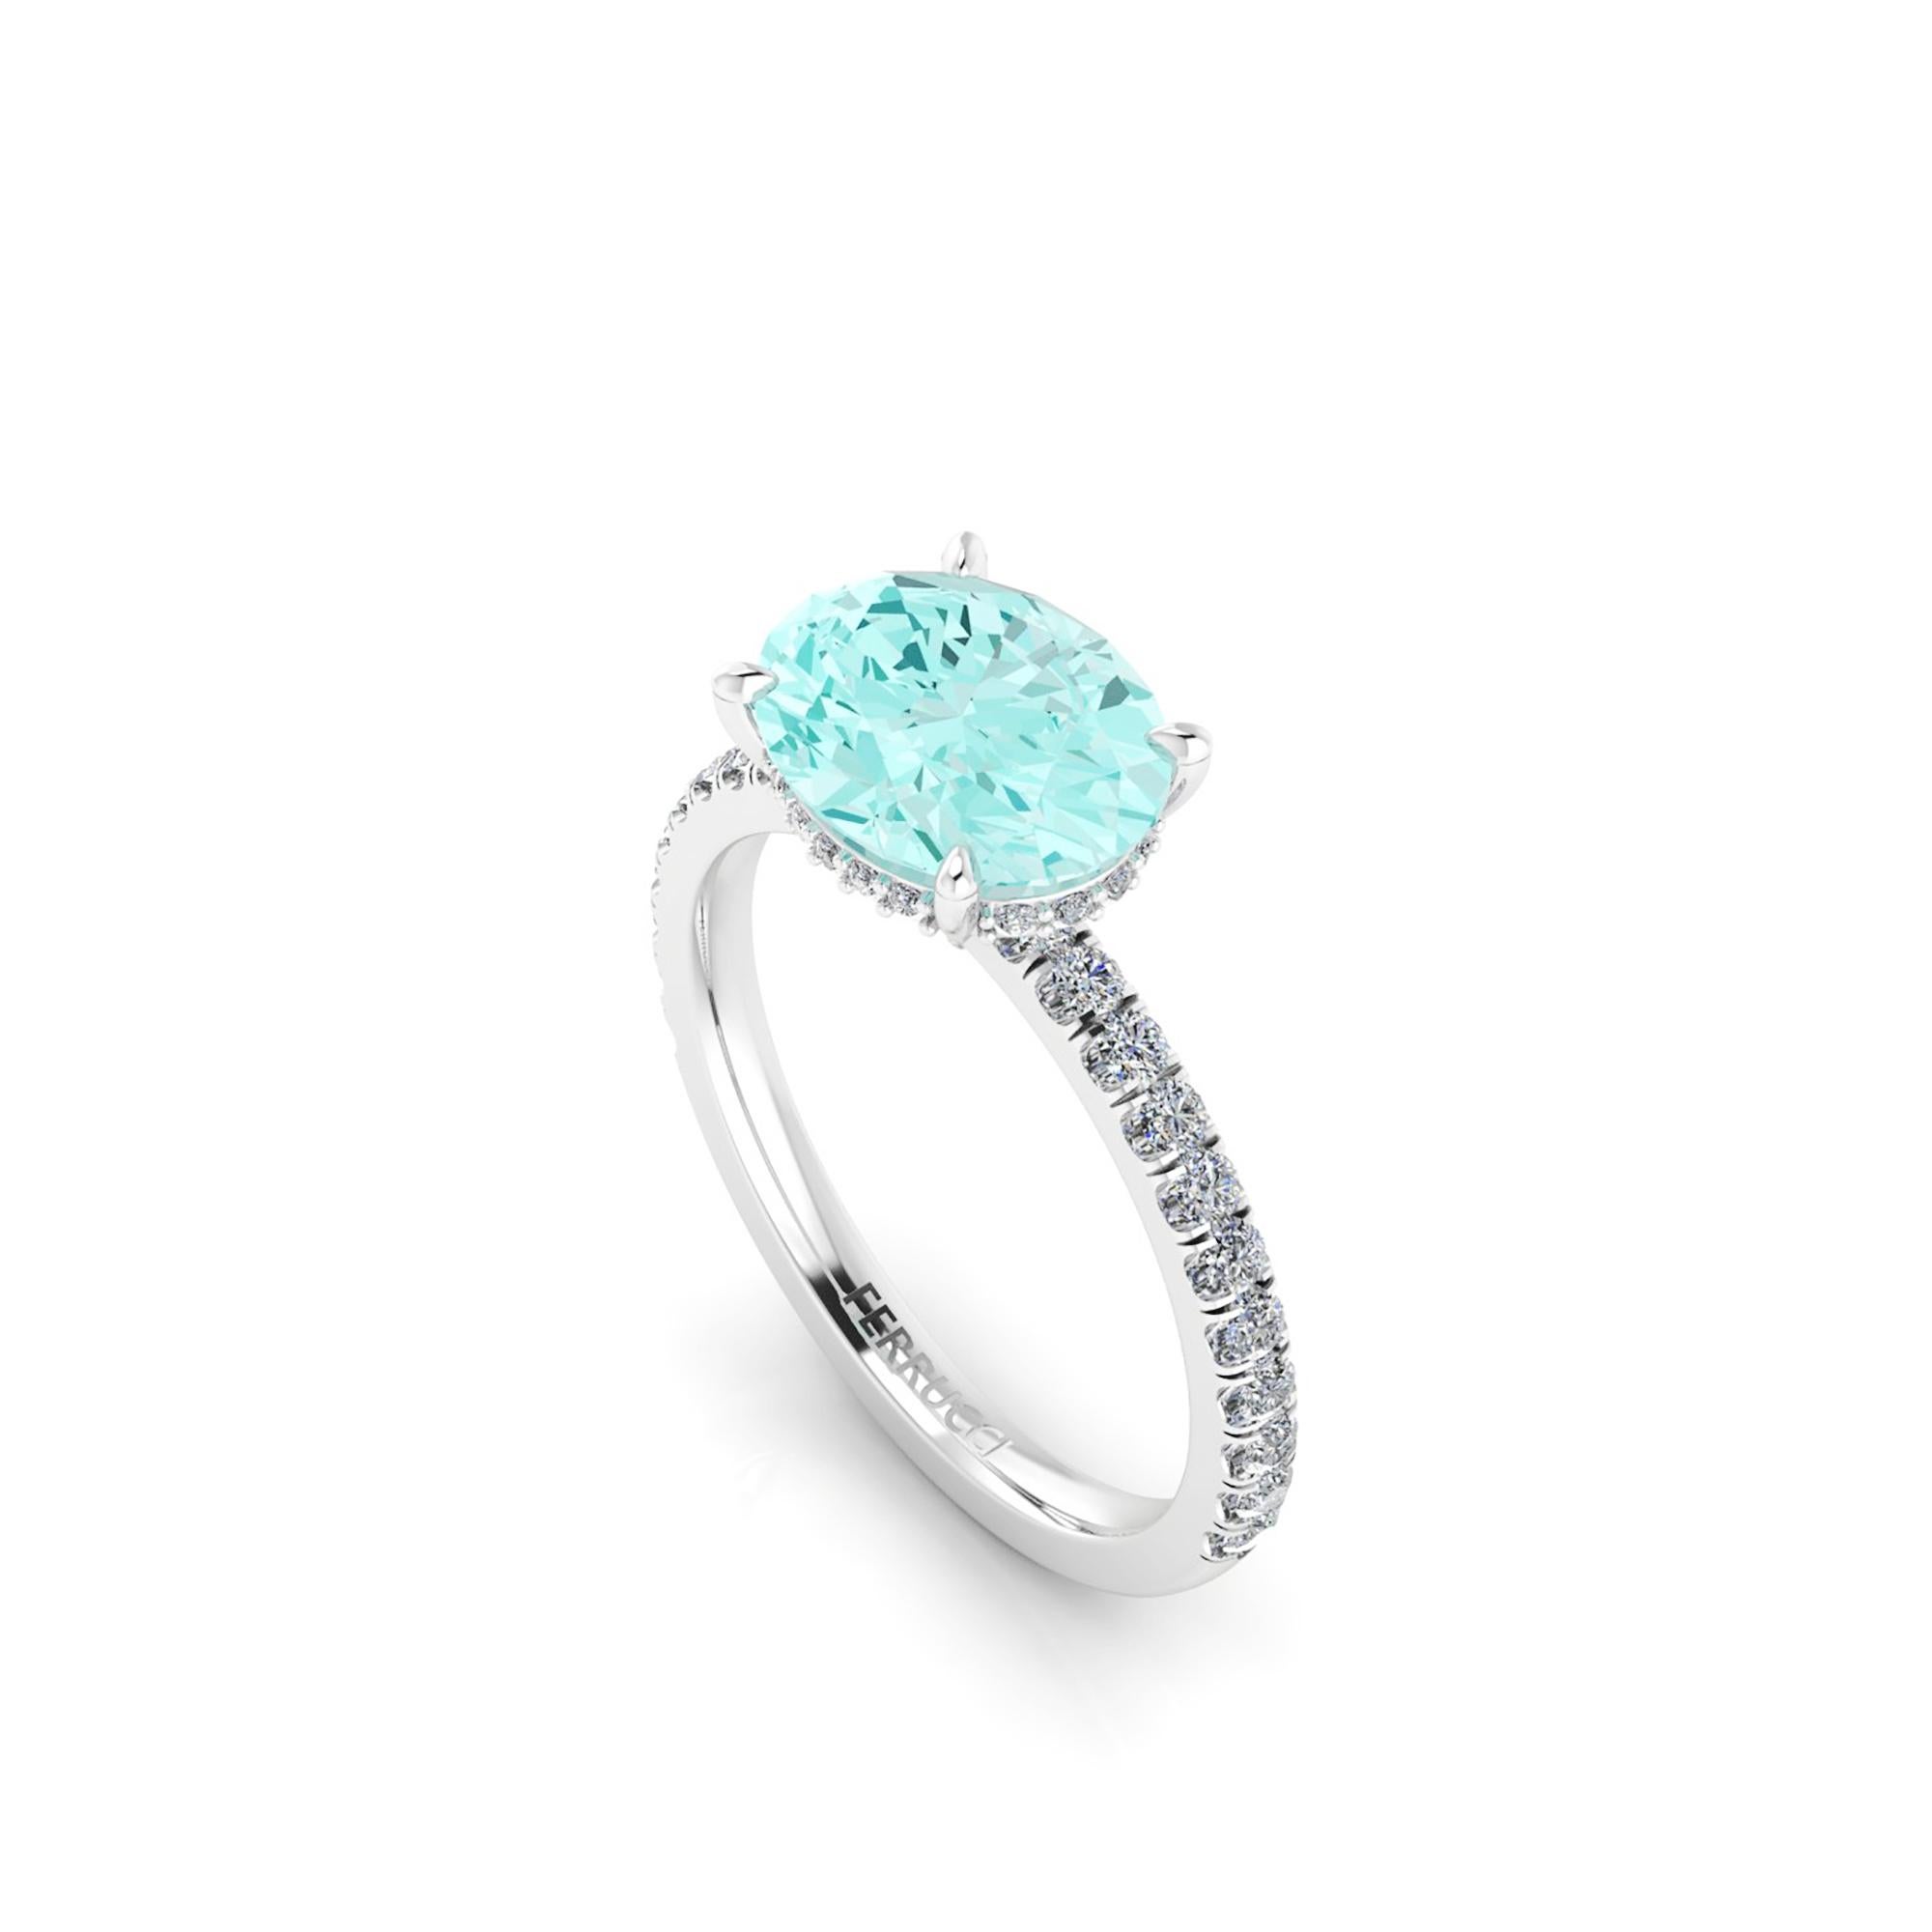 AGL Certified 2.11 carat Paraiba tourmaline, hand cut in Oval cut shape, a rare gem, conceived in a hand made Platinum ring, set Horizontally and
adorned with a shower of white diamonds, hand set on almost every surface to give the maximum light